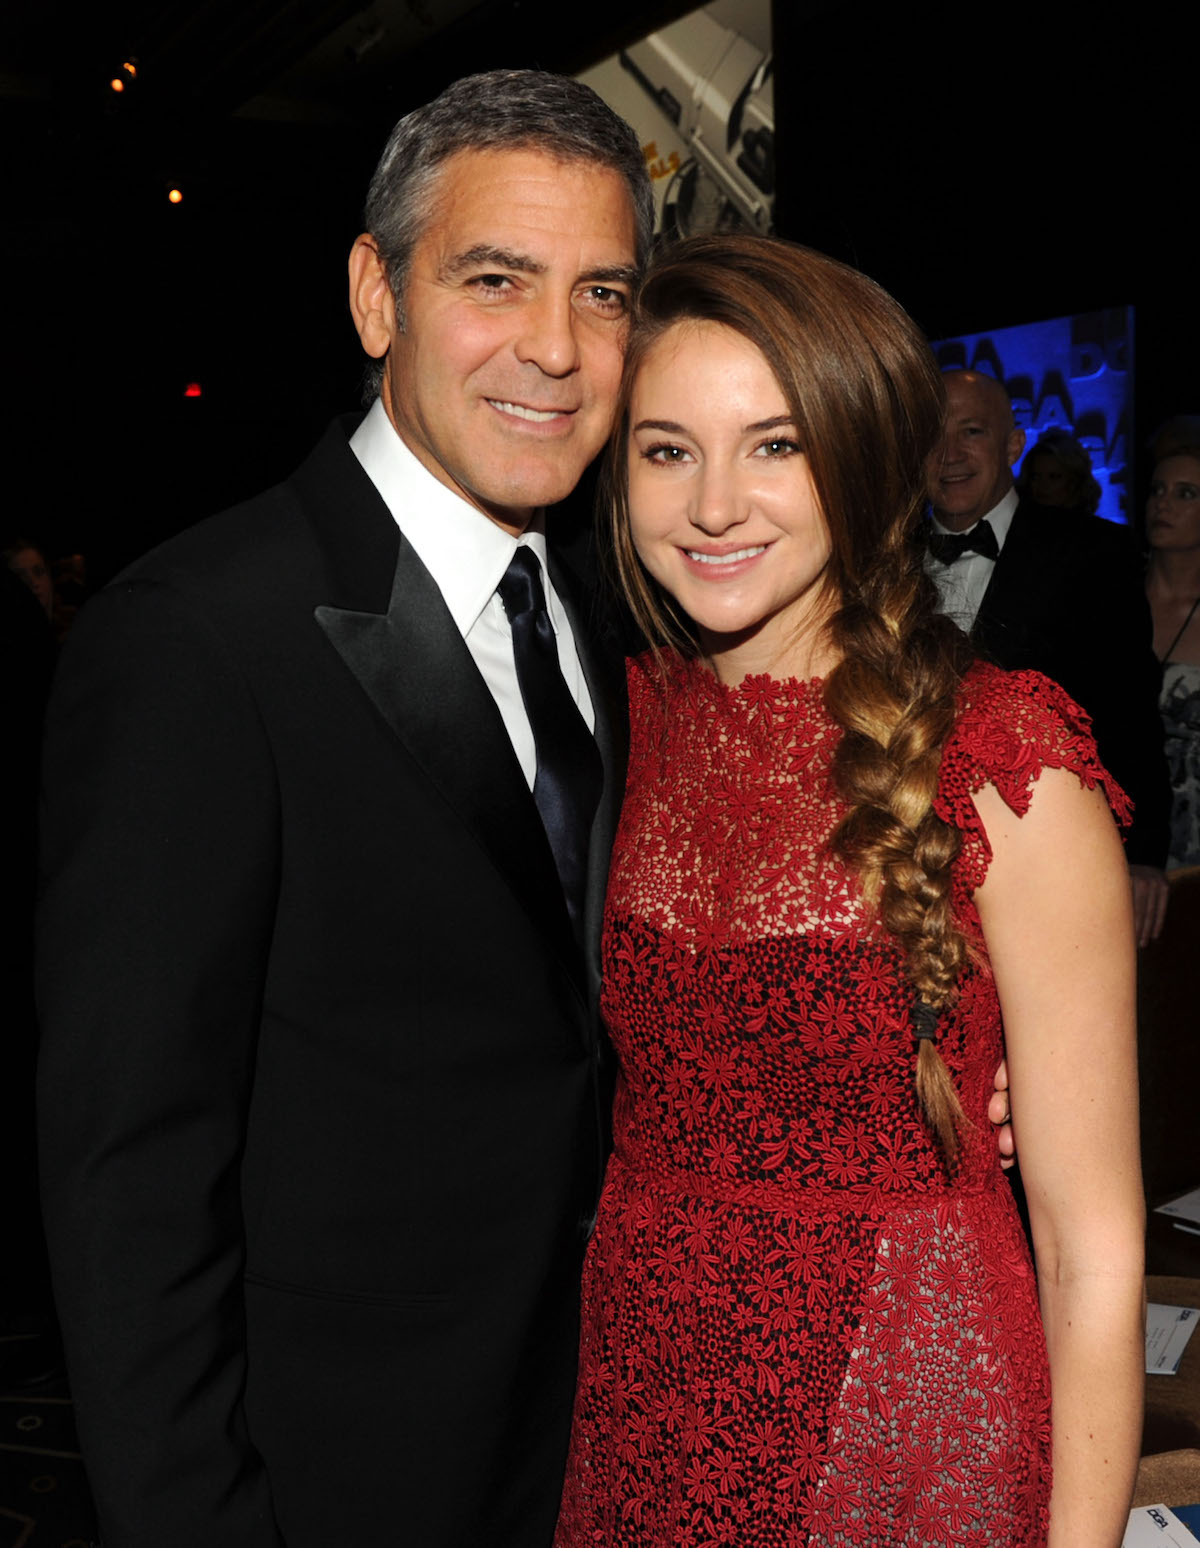 George Clooney and Shailene Woodley smile as they pose for a photo at the 2012 Directors Guild of America Awards cocktail reception